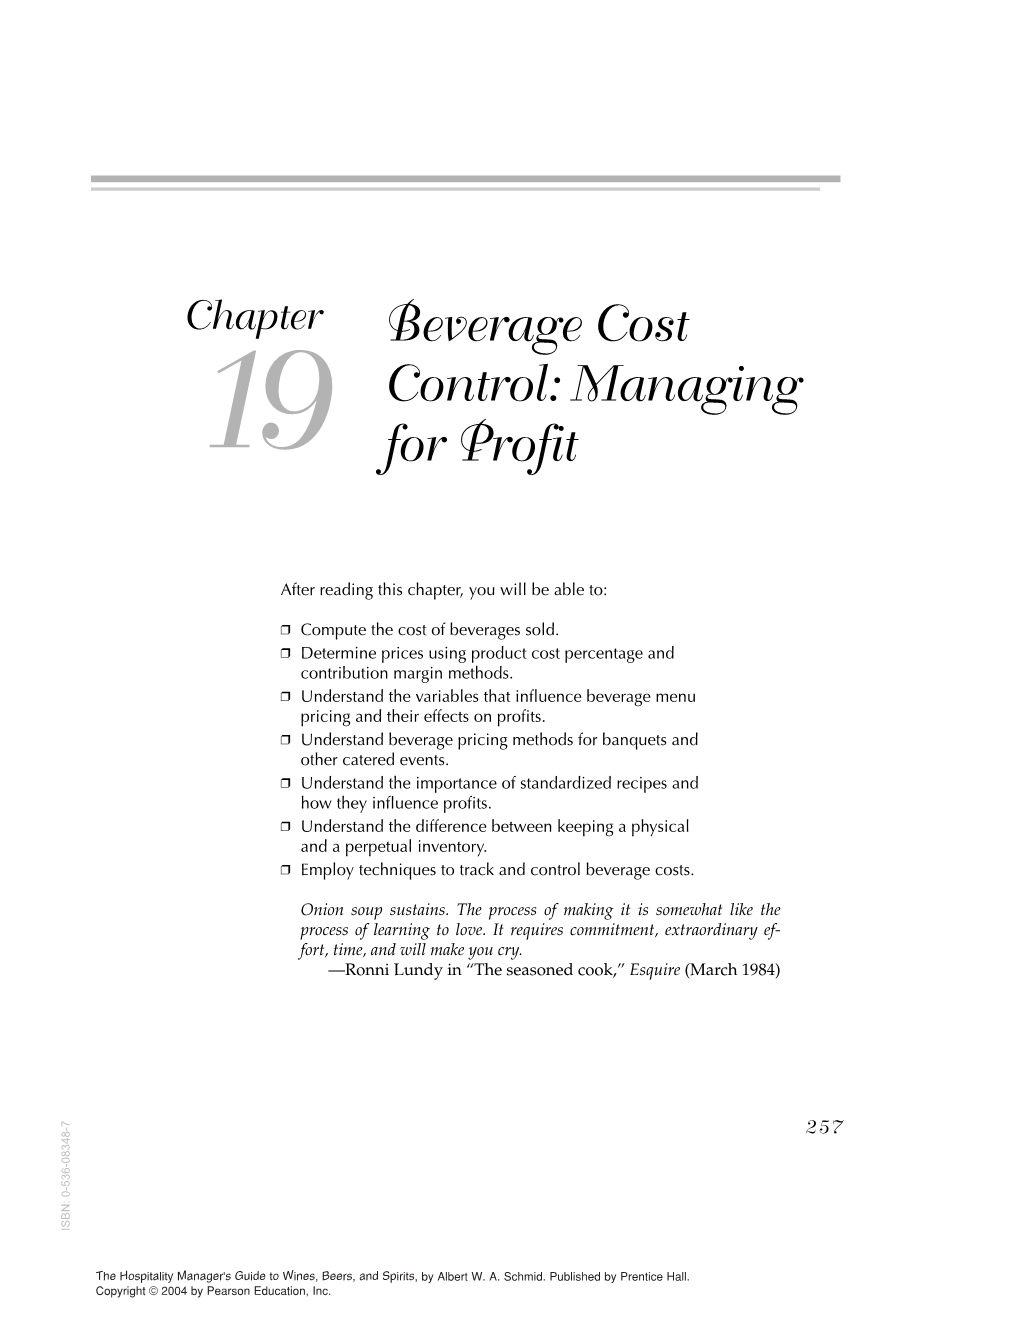 Beverage Cost Control: Managing for Profit ❖ 259